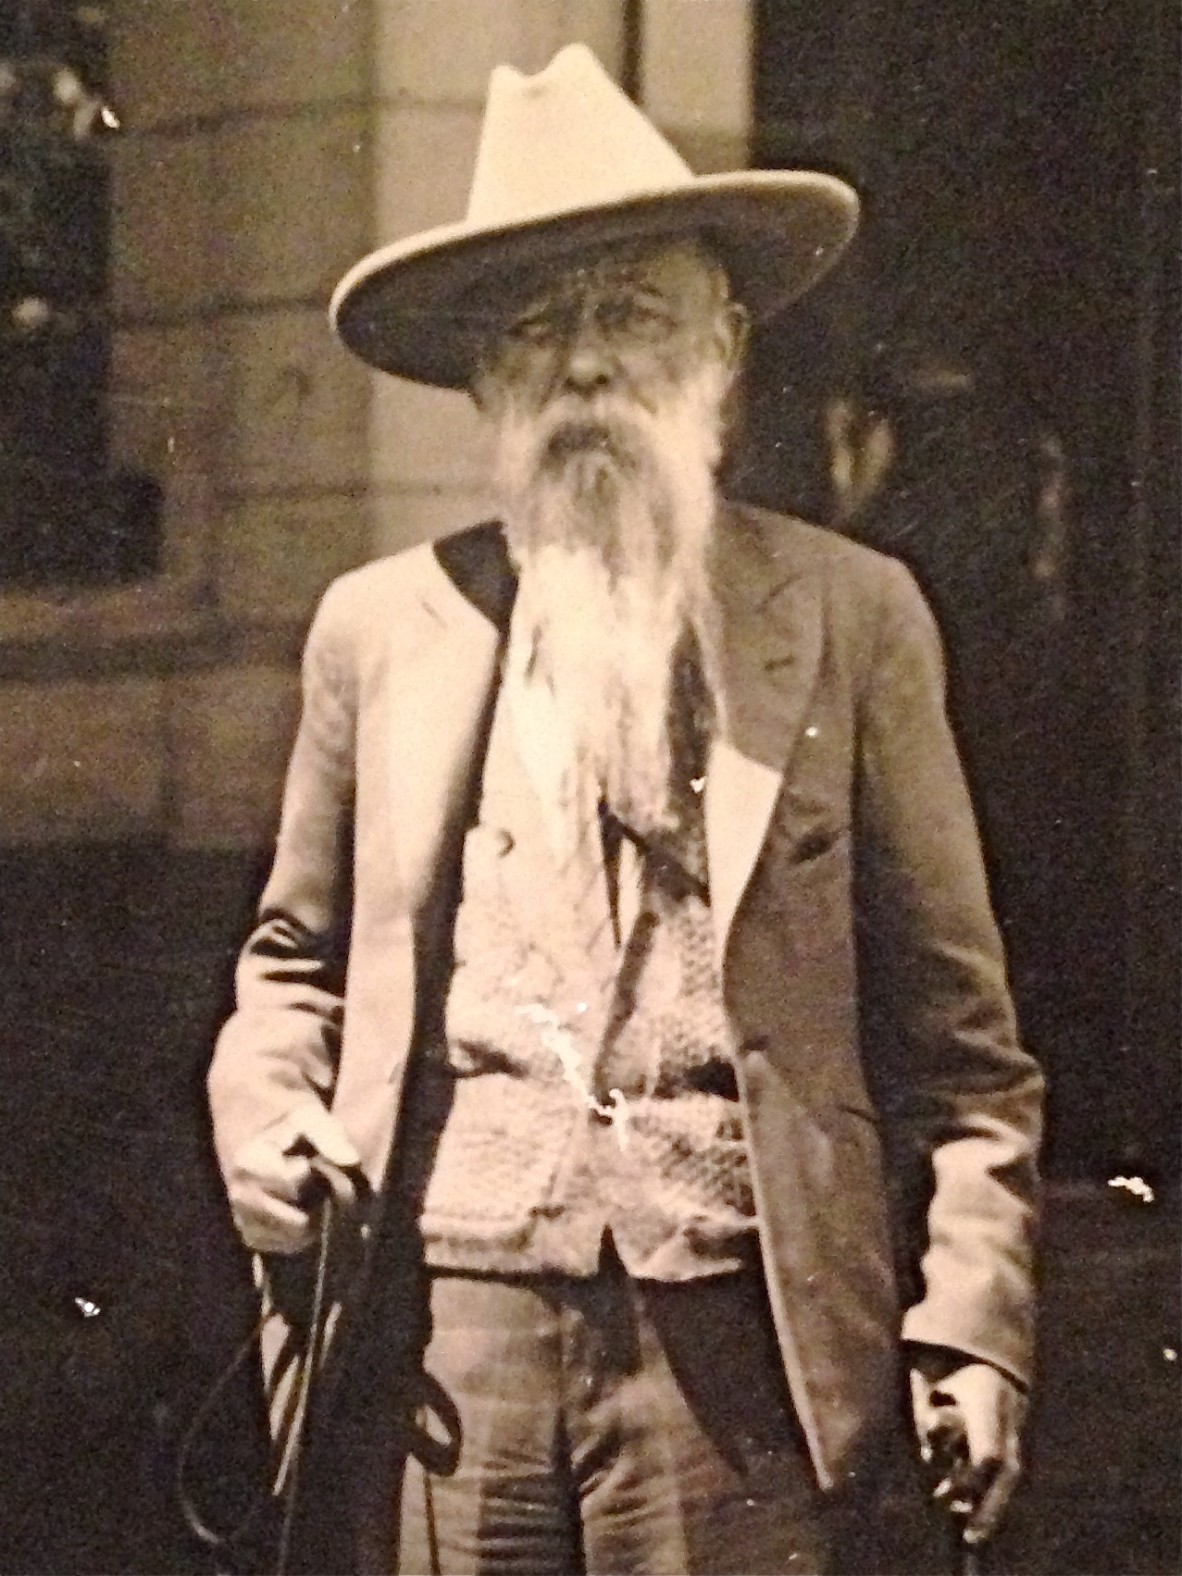 Sepia image of man with a long beard wearing a jacket and vest, holding a leash in right hand